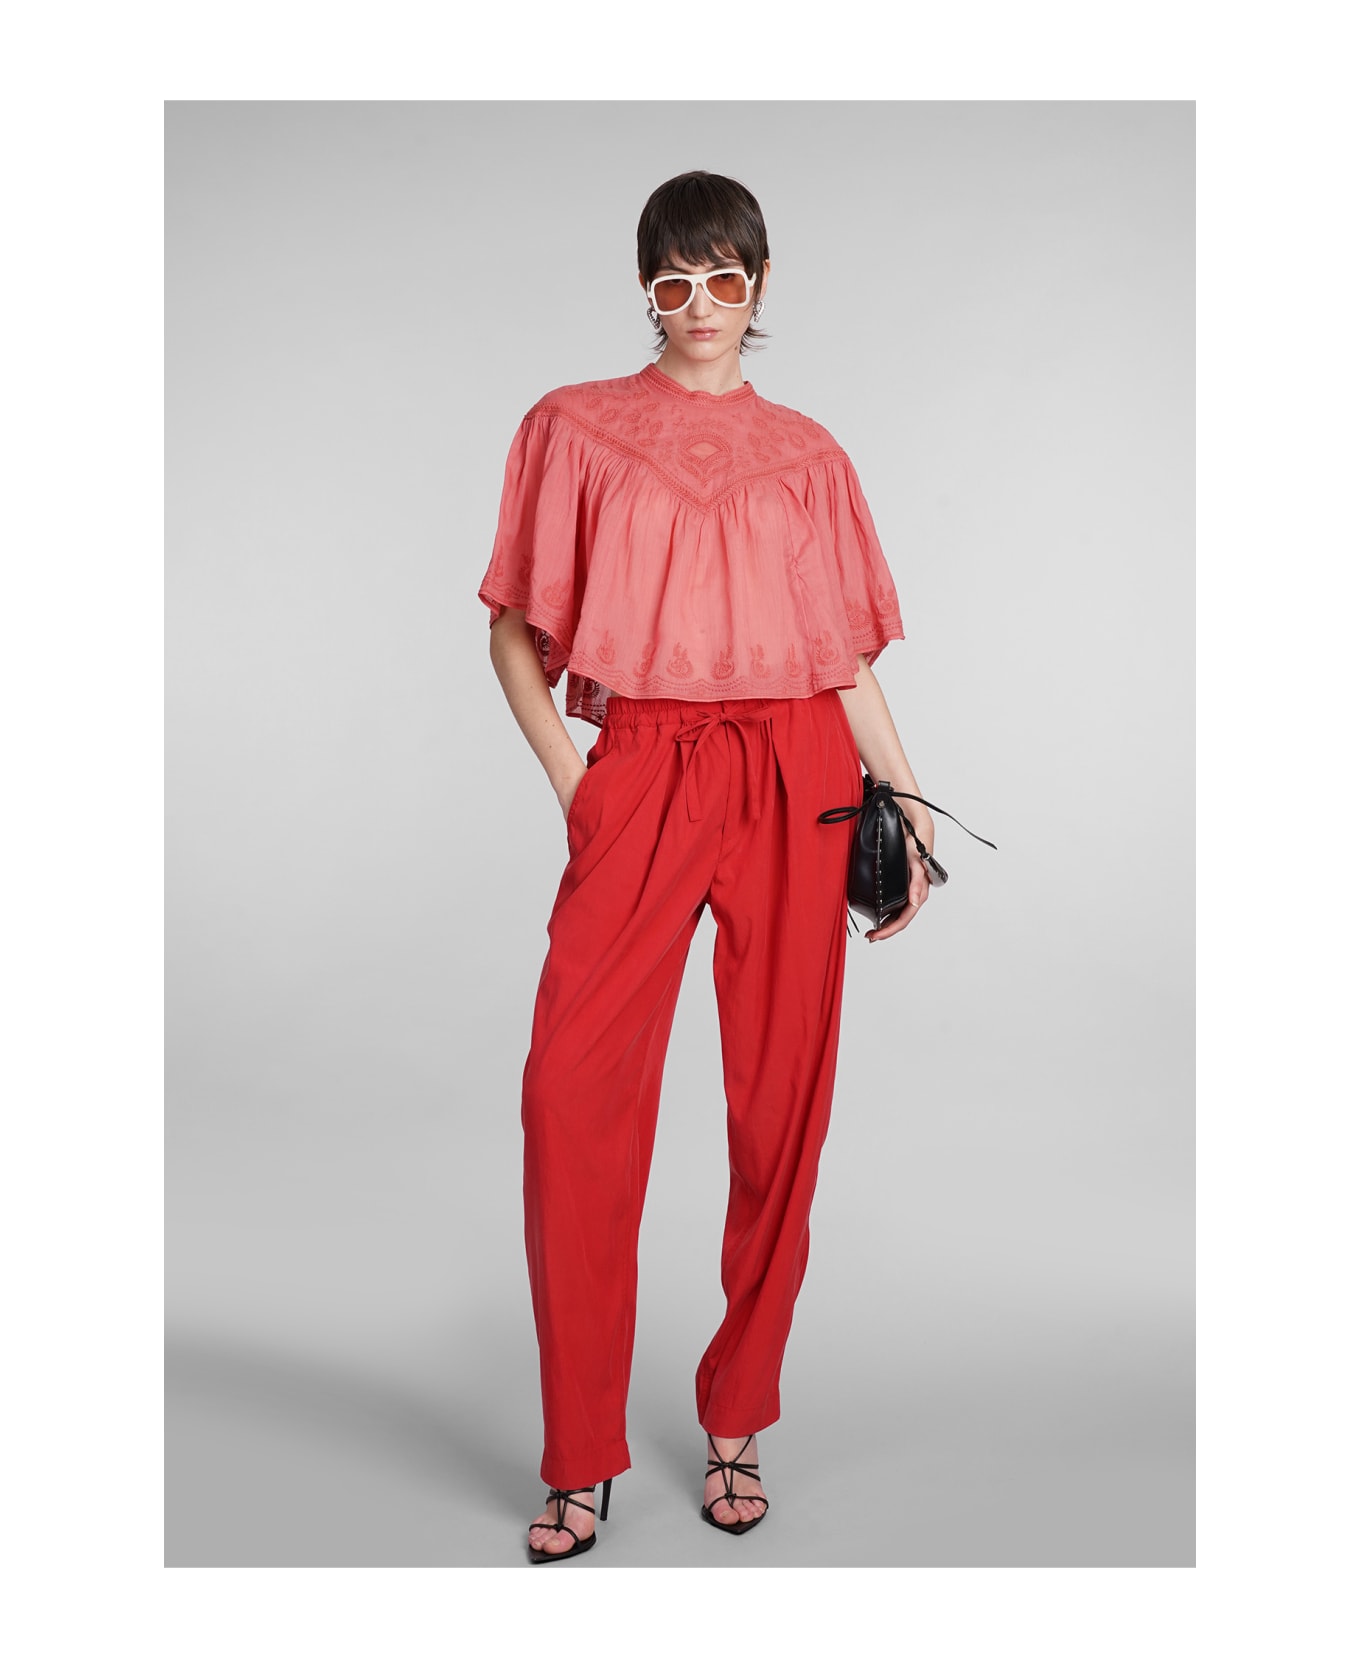 Isabel Marant Hectorina Pants In Red Wool And Polyester - red ボトムス